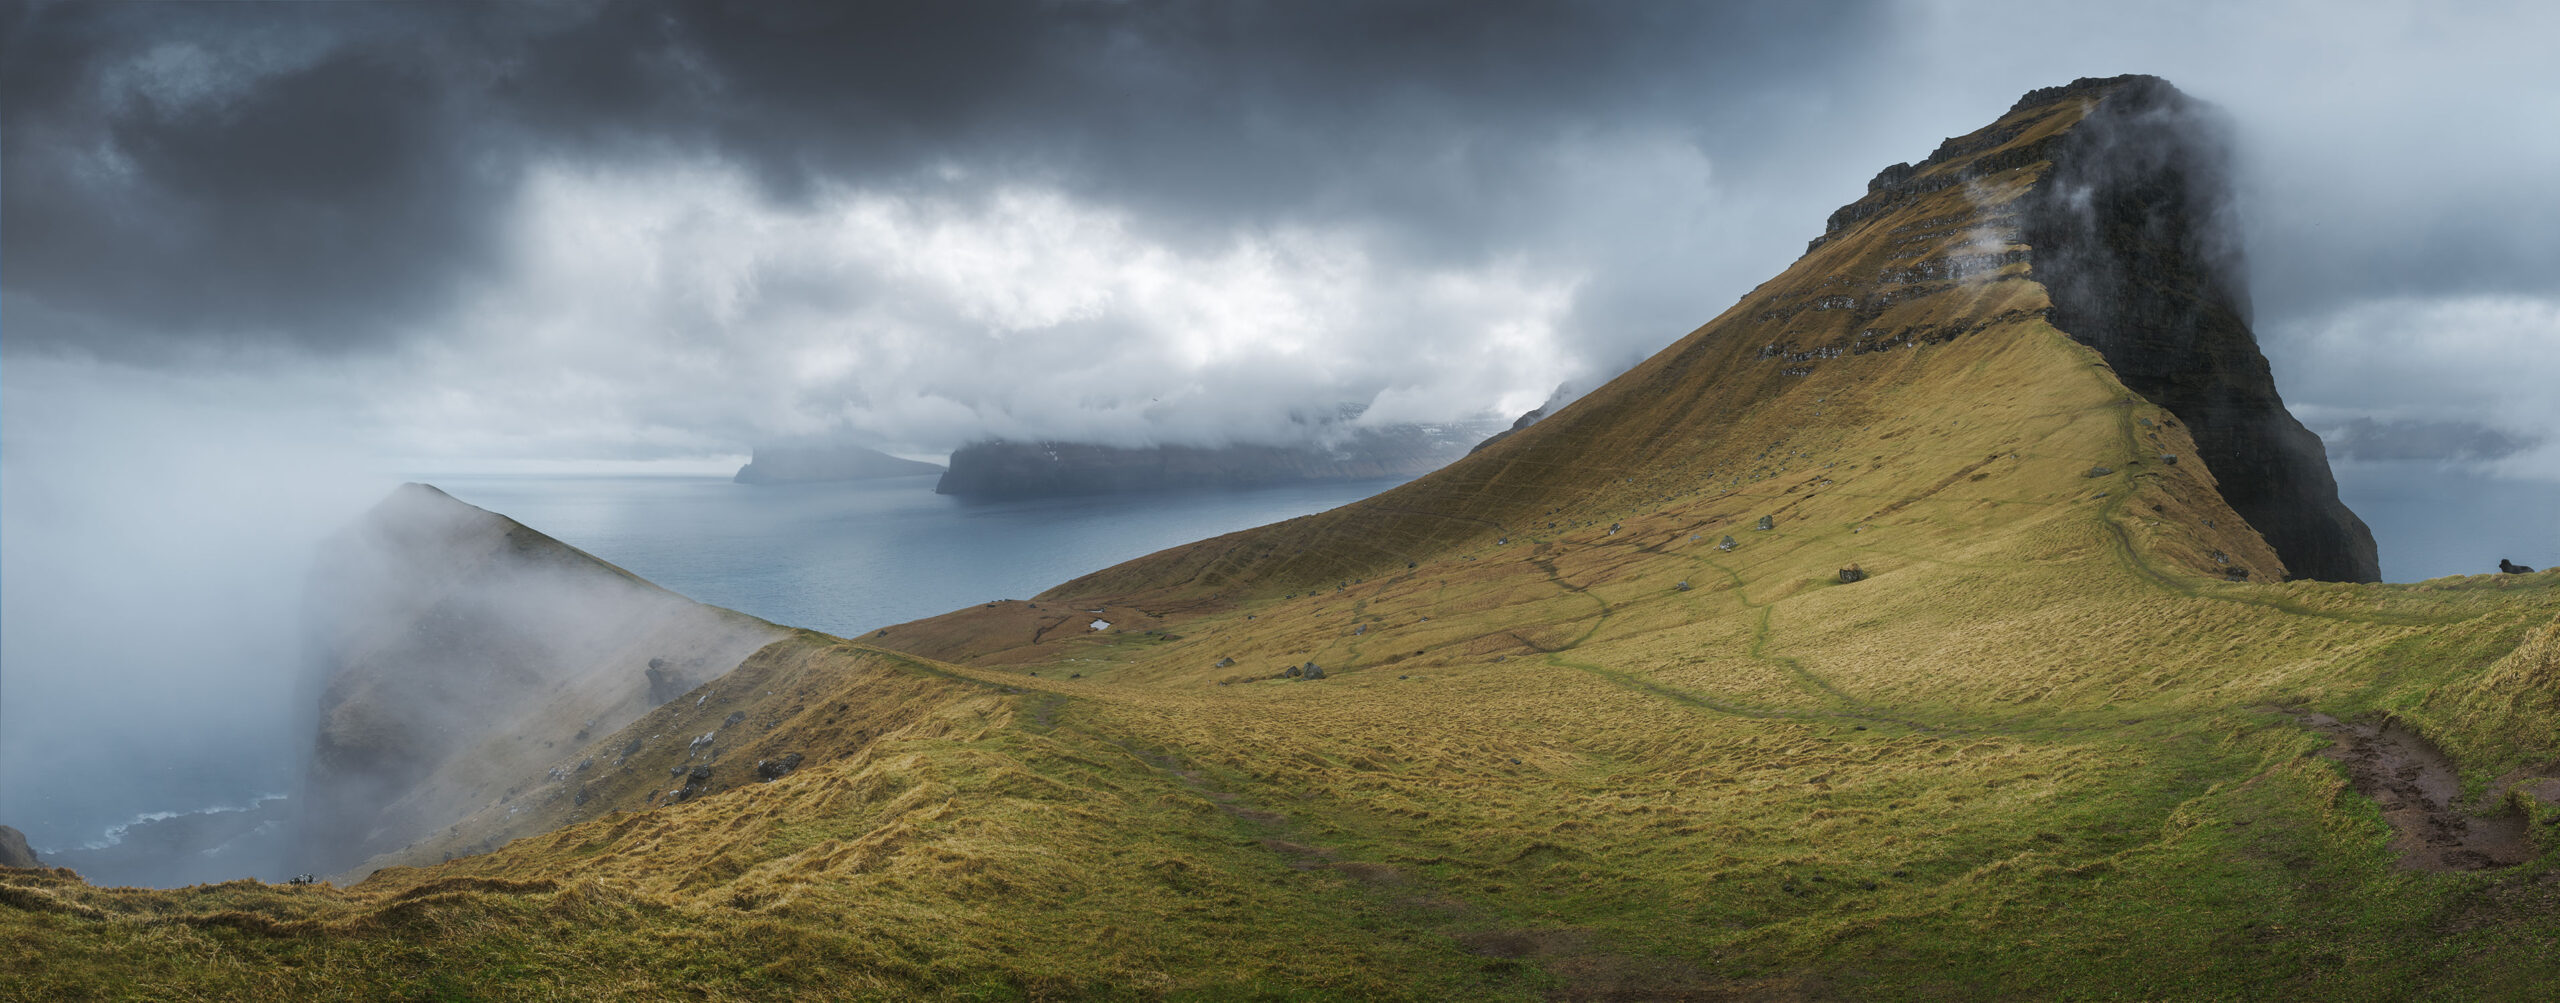 Panorama of the island of Kalsoy and the Kallur Lighthouse under a dark and dramatic sky.